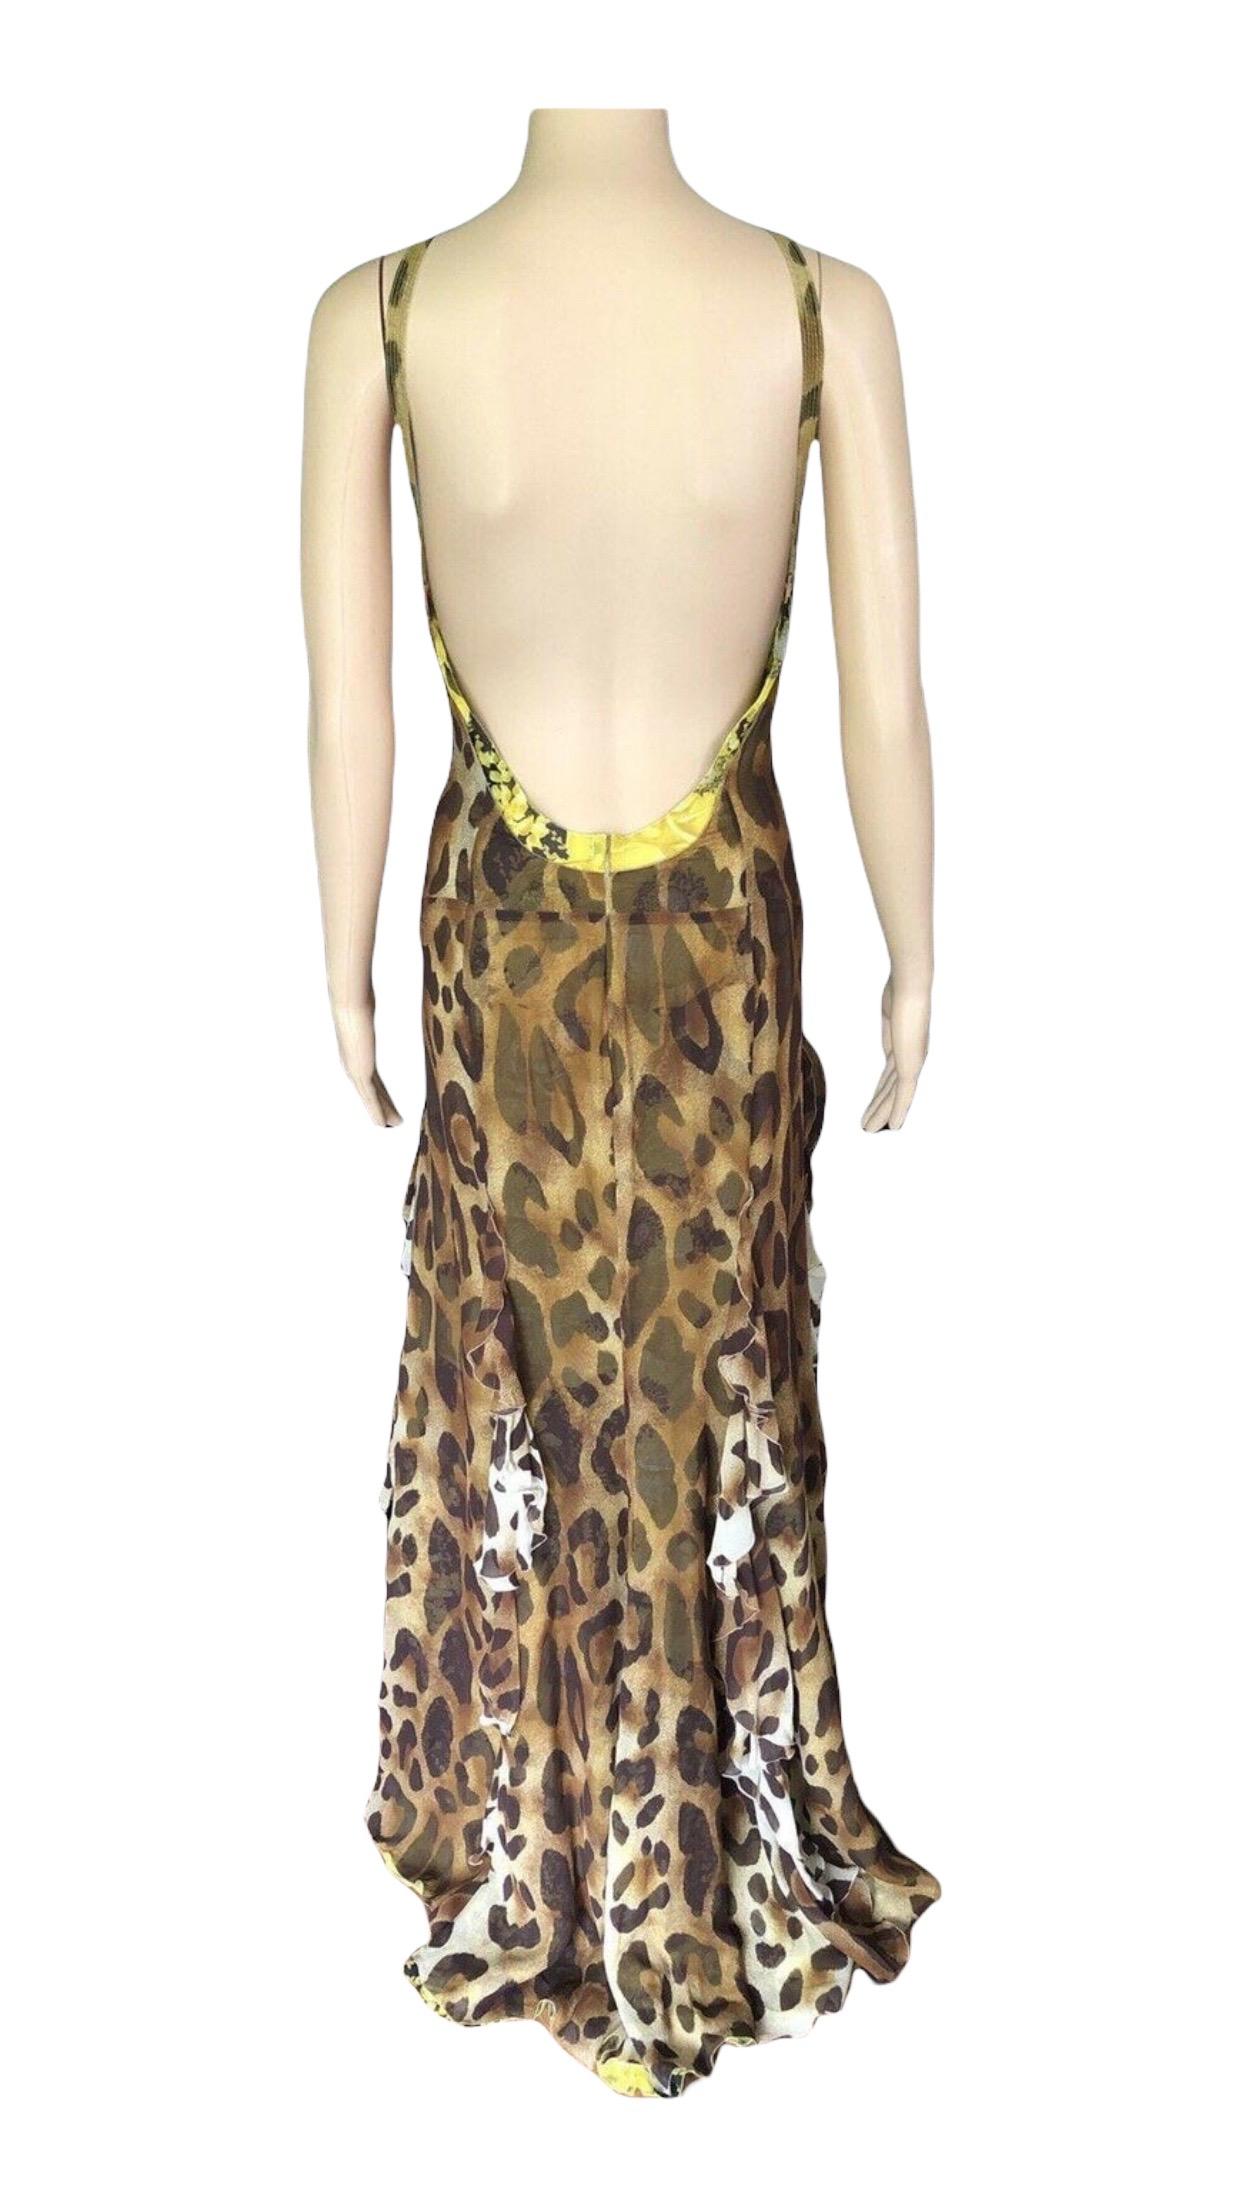 Gianni Versace S/S 2002 Vintage Plunged Backless Dress Gown For Sale 6